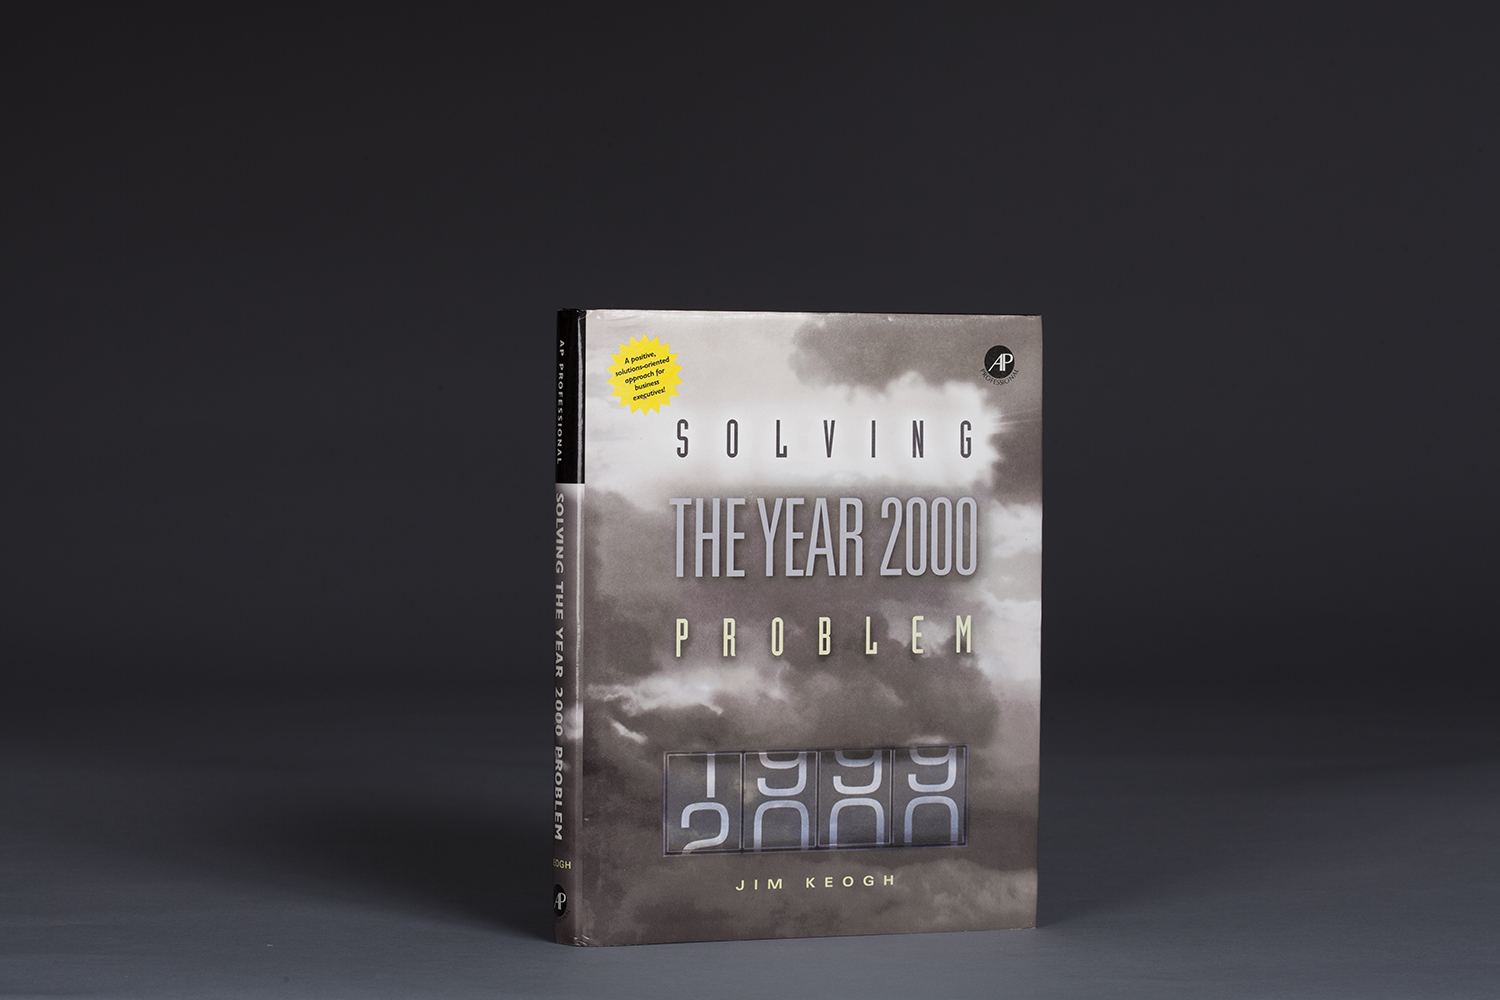 Solving the Year 2000 Problem - 9982 Cover.jpg